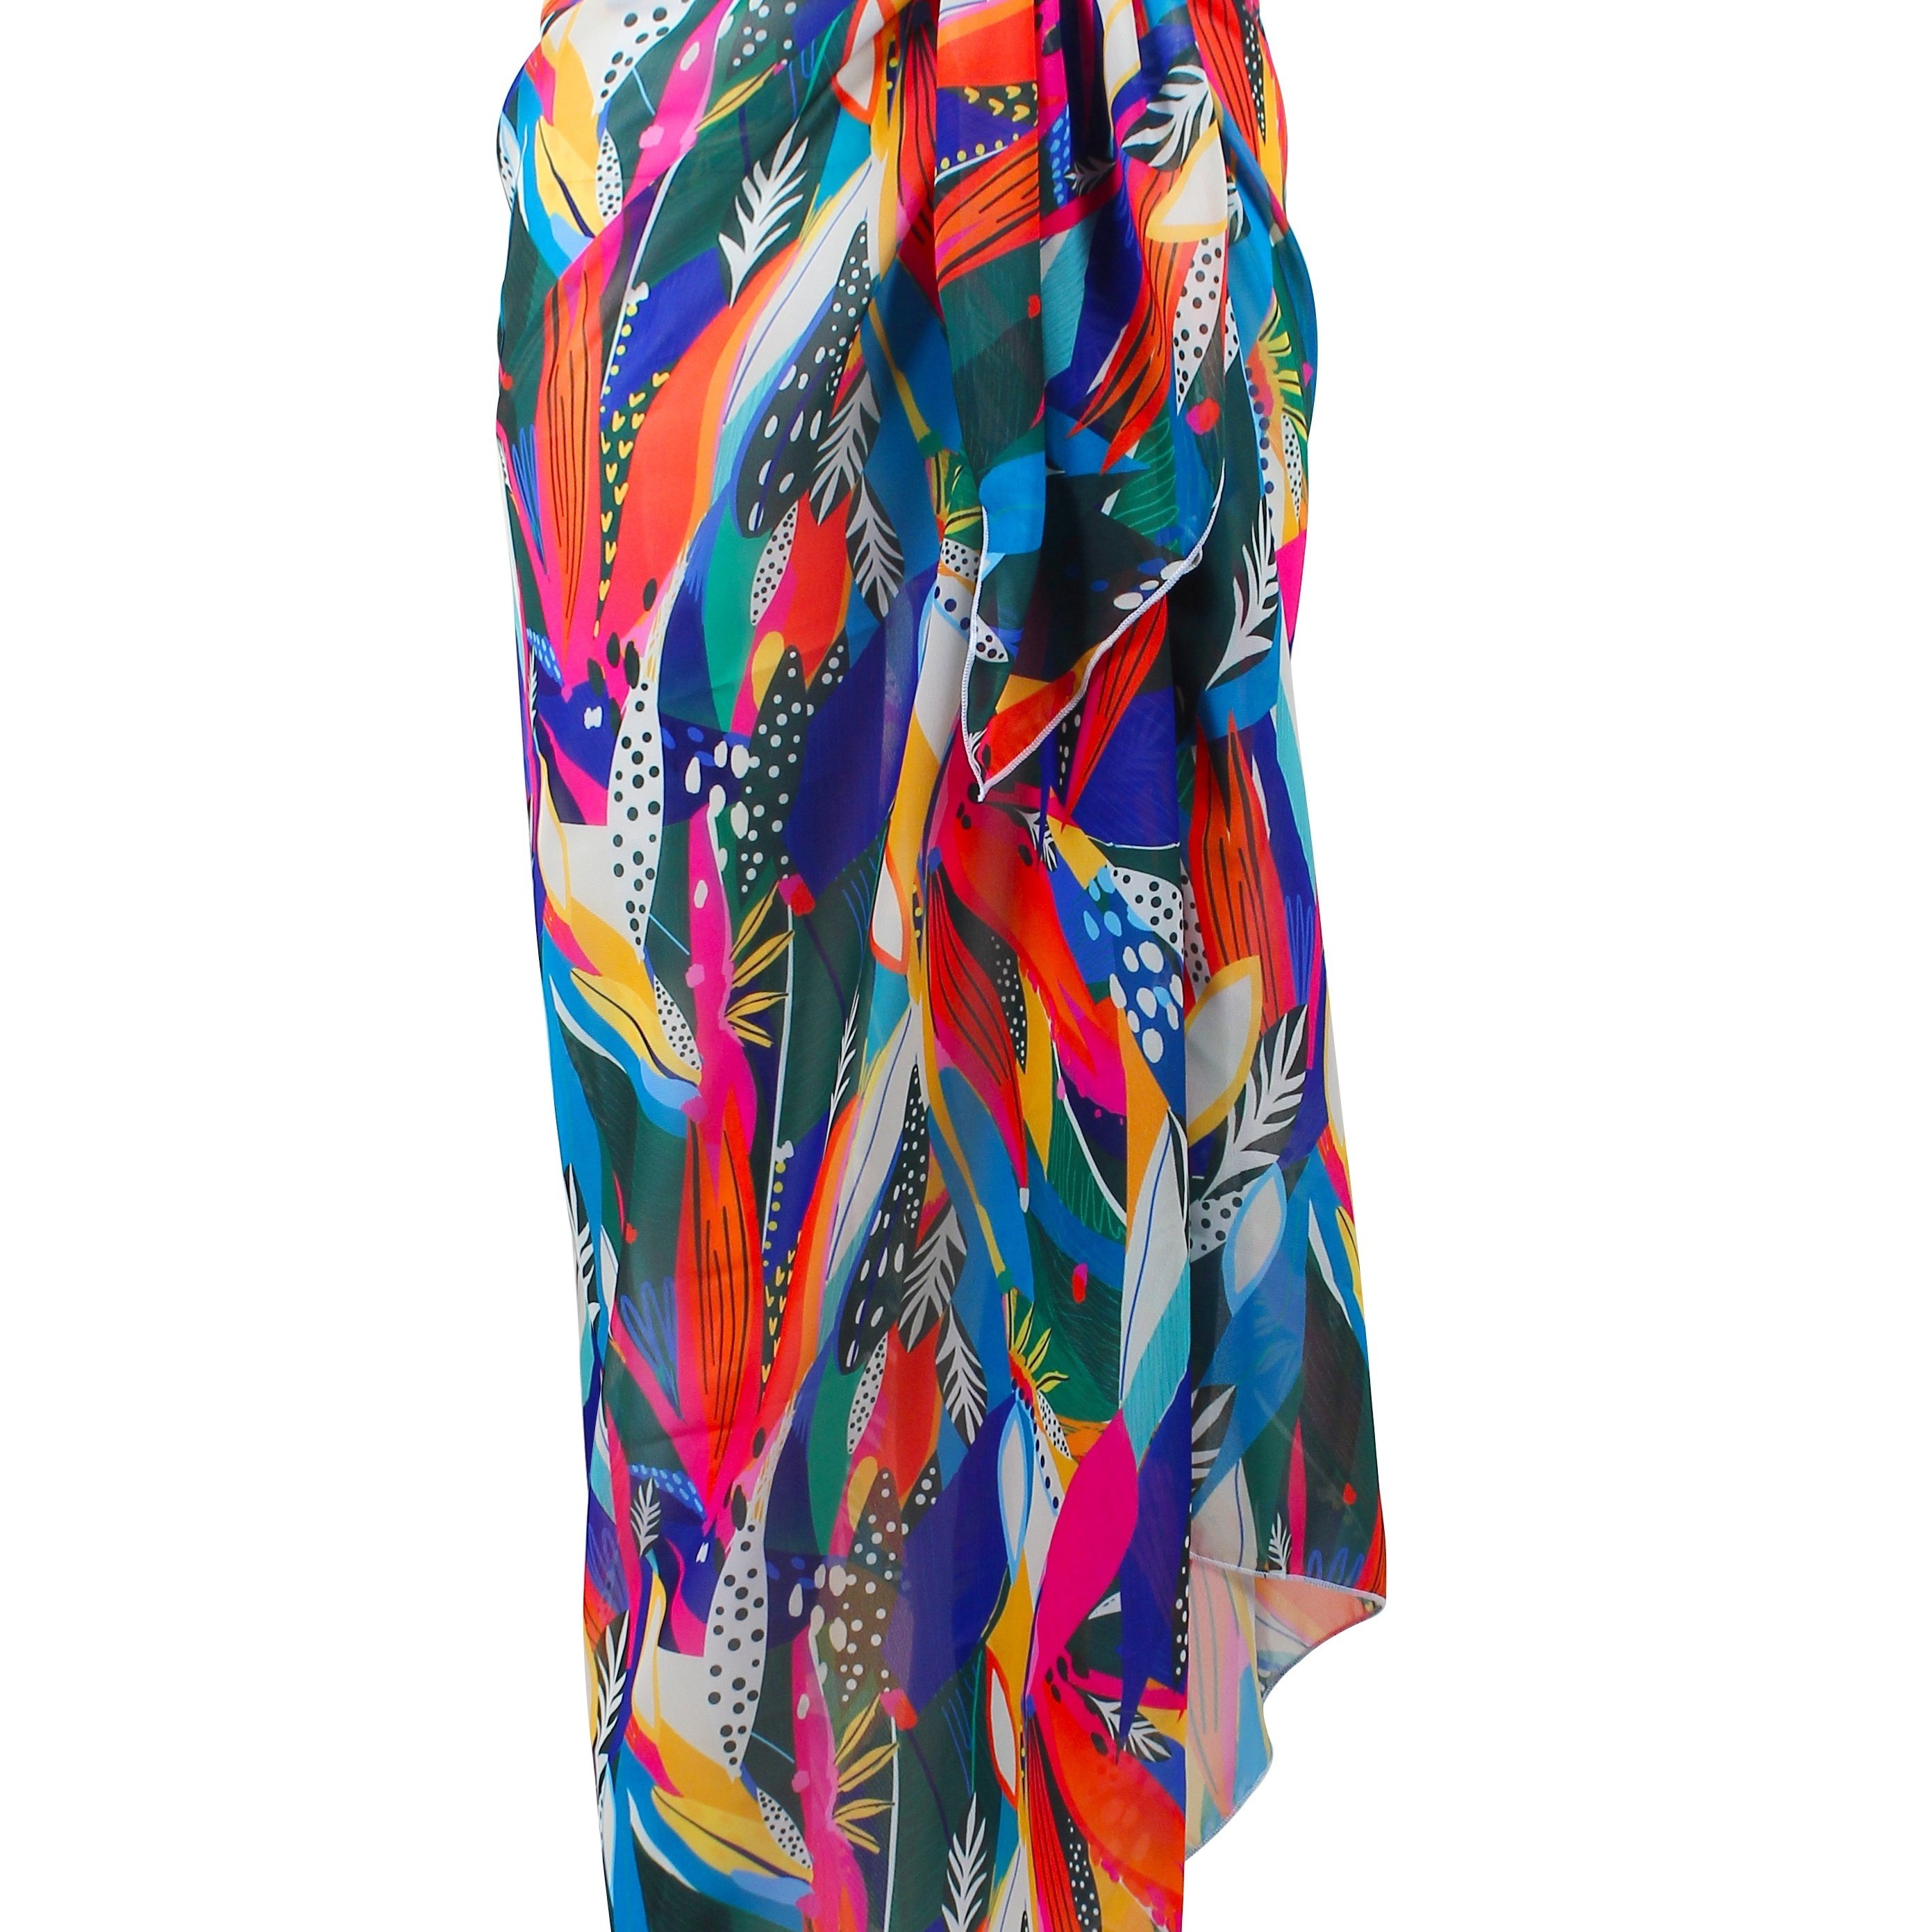 PRINTED PAREO PANTS - Multicolored